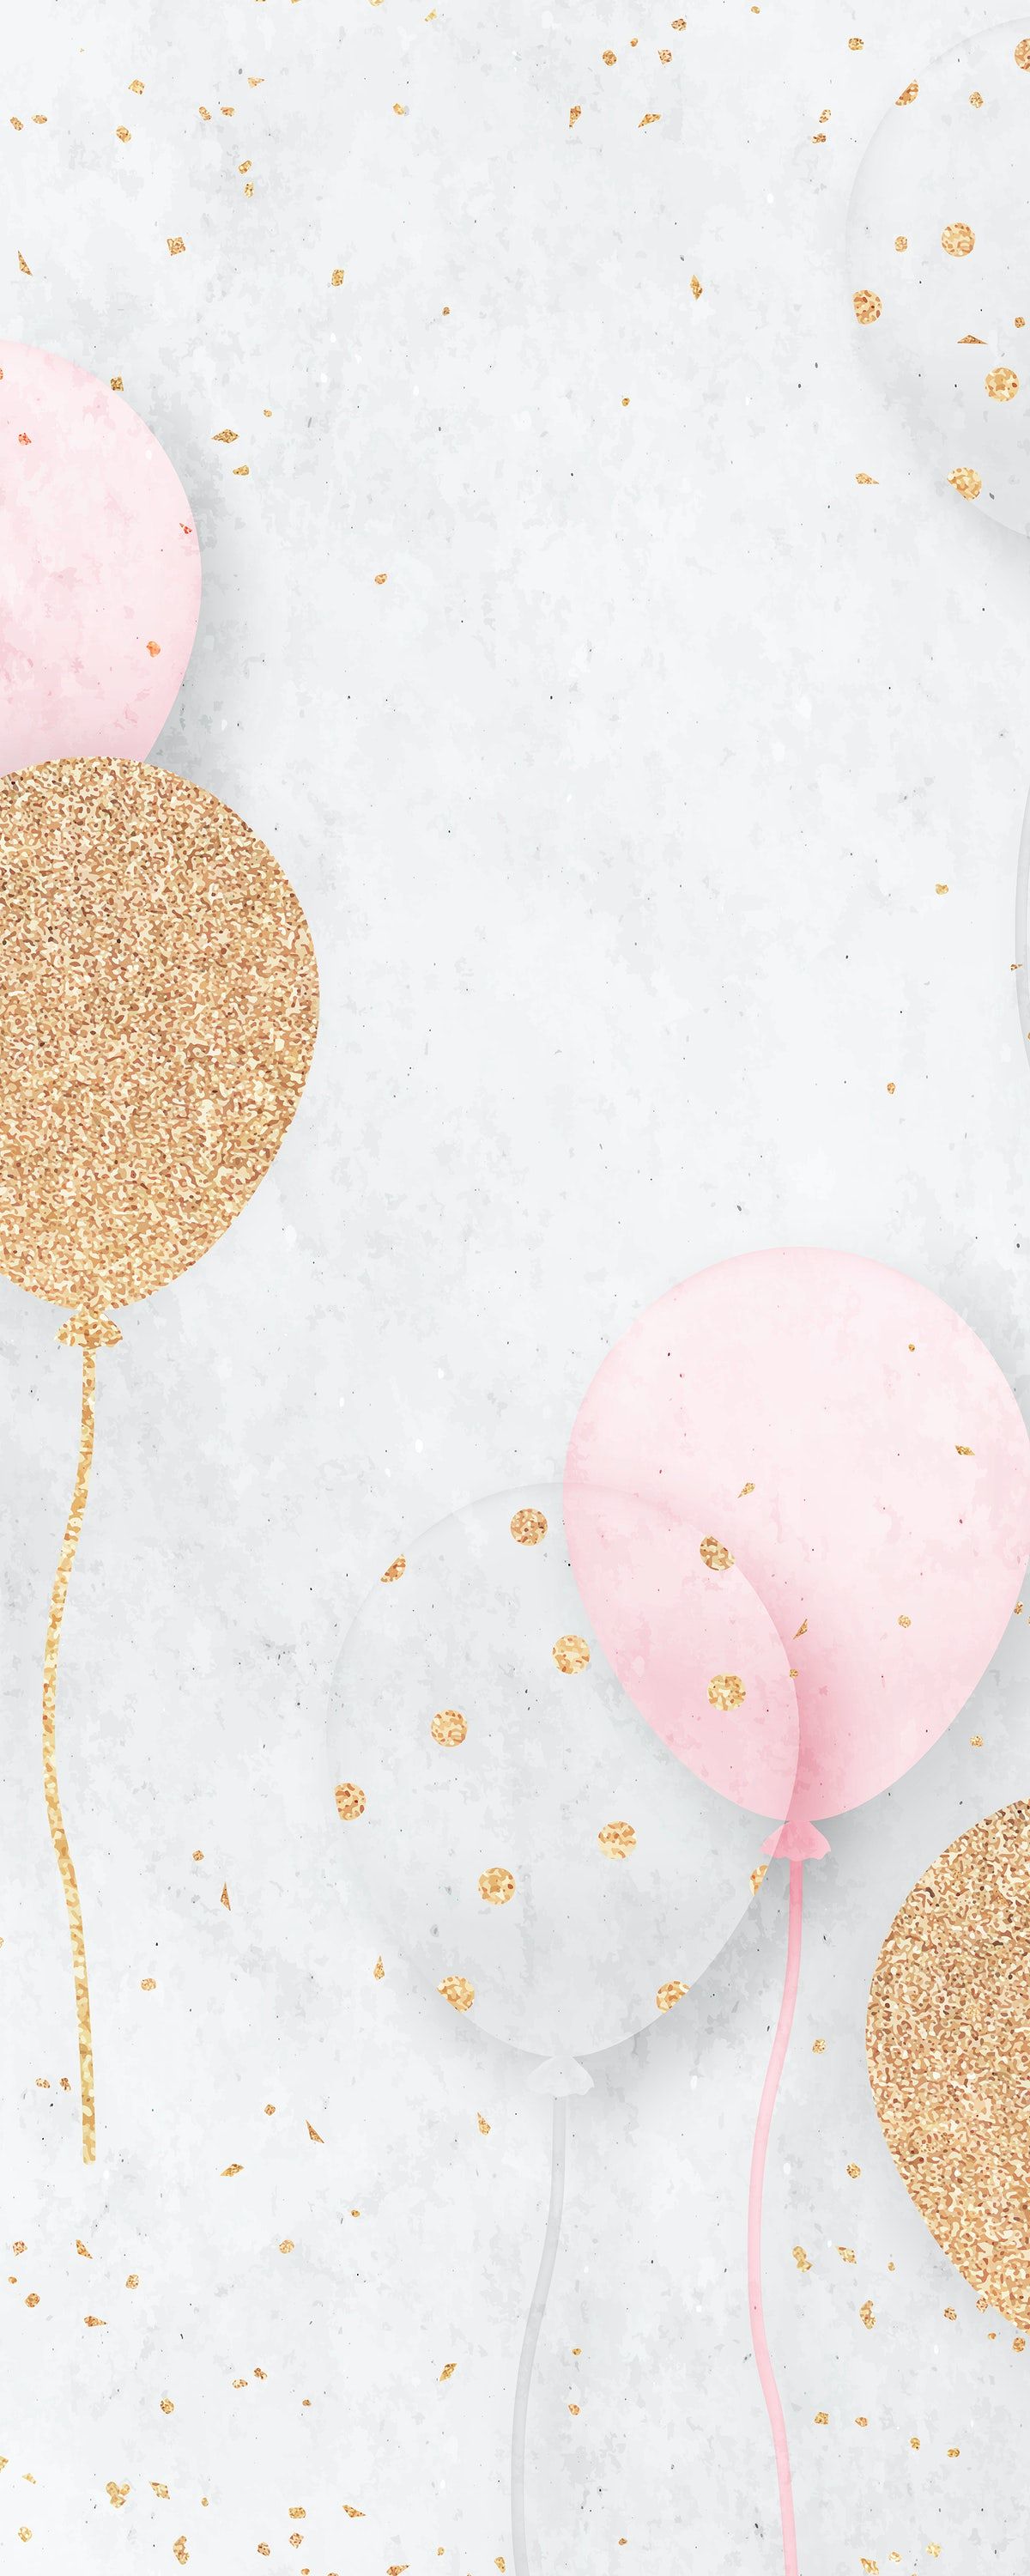 Pink And Gold Glittery Balloons Background Vector Premium Image